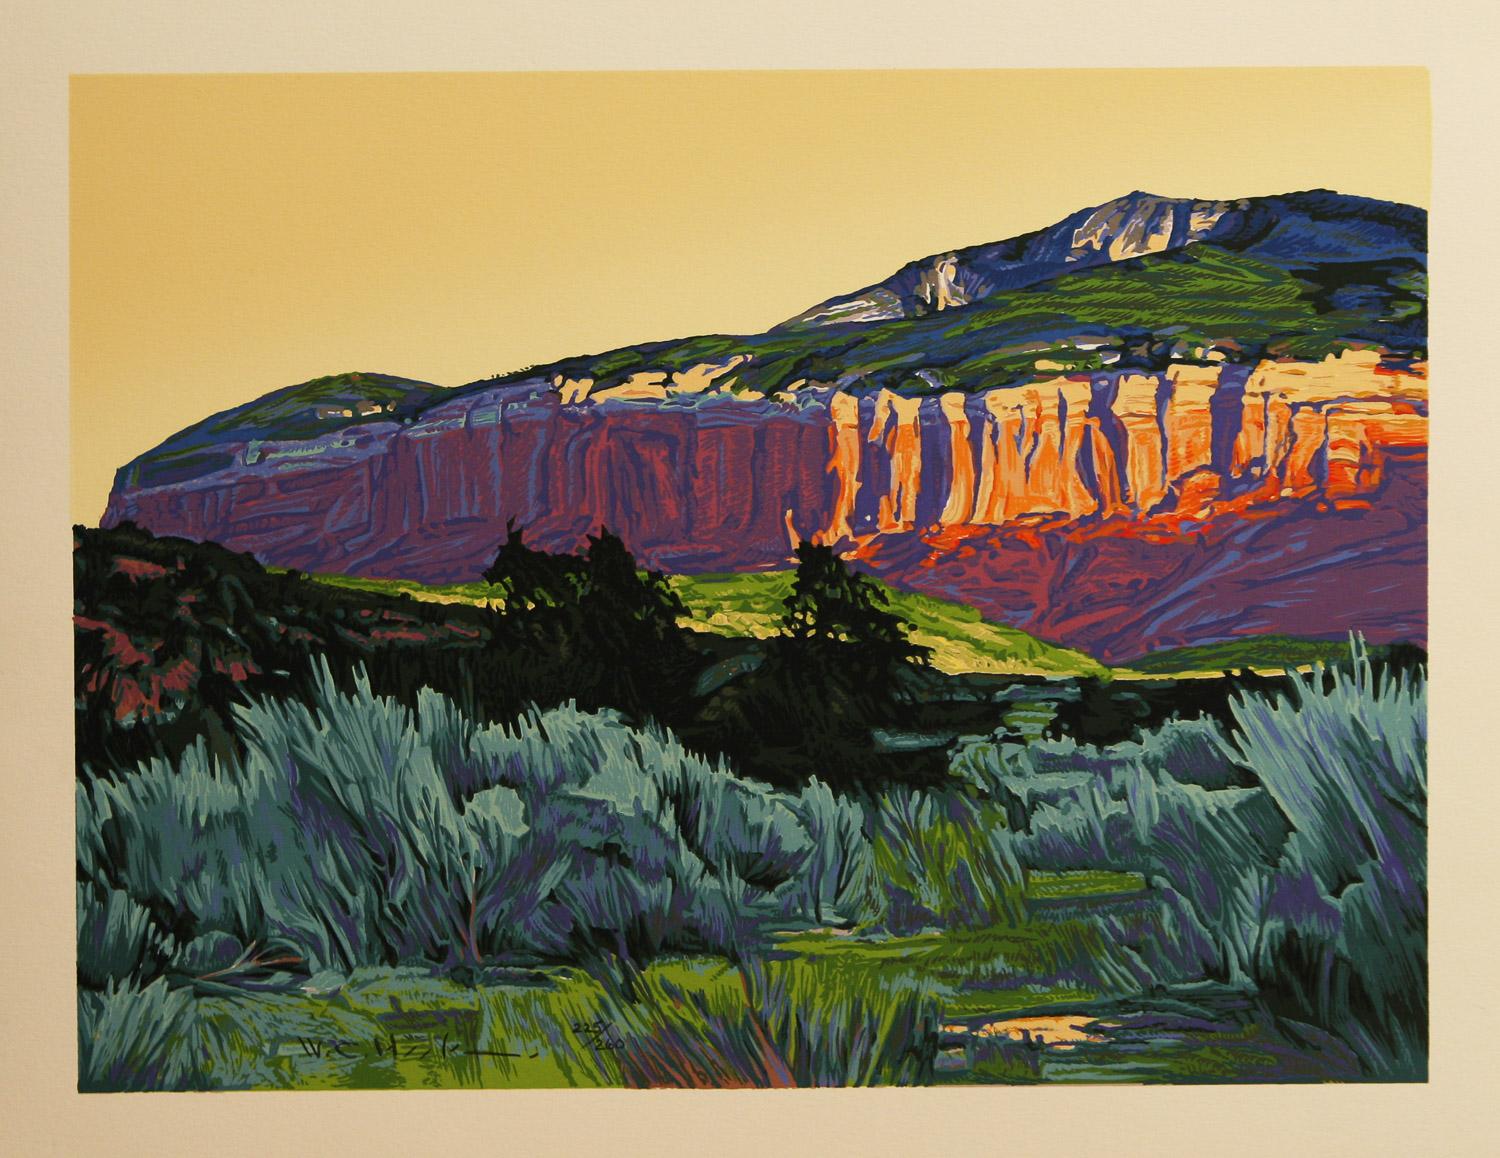 Chama Canyon hand pulled serigraph by William Hook